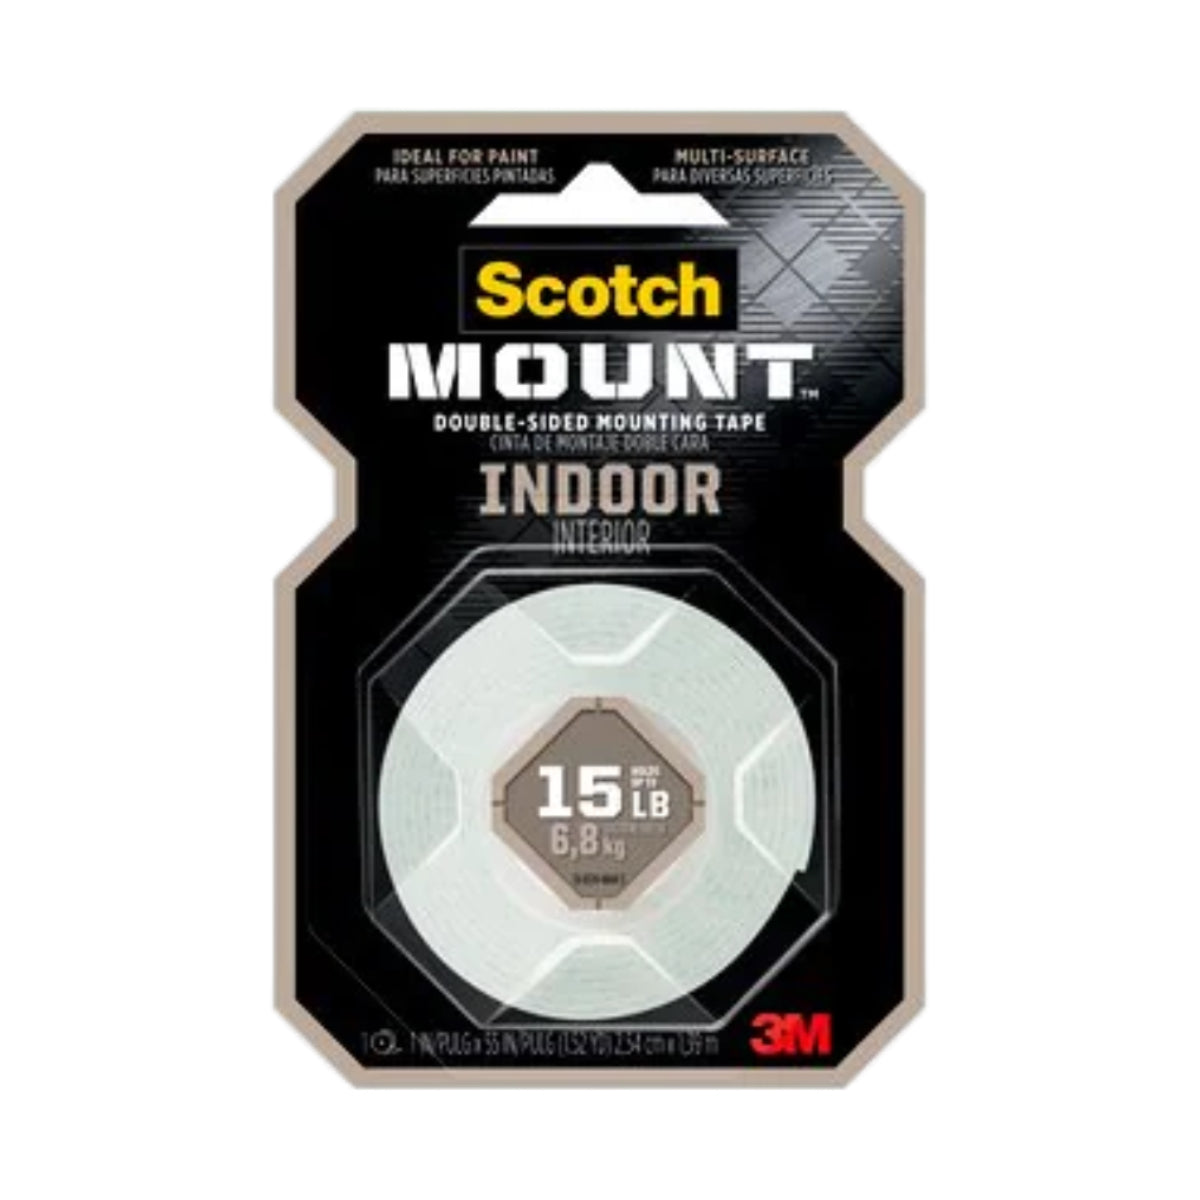 3M Scotch Mounting Tape 110H, Indoor, 1/2 x 75 inches